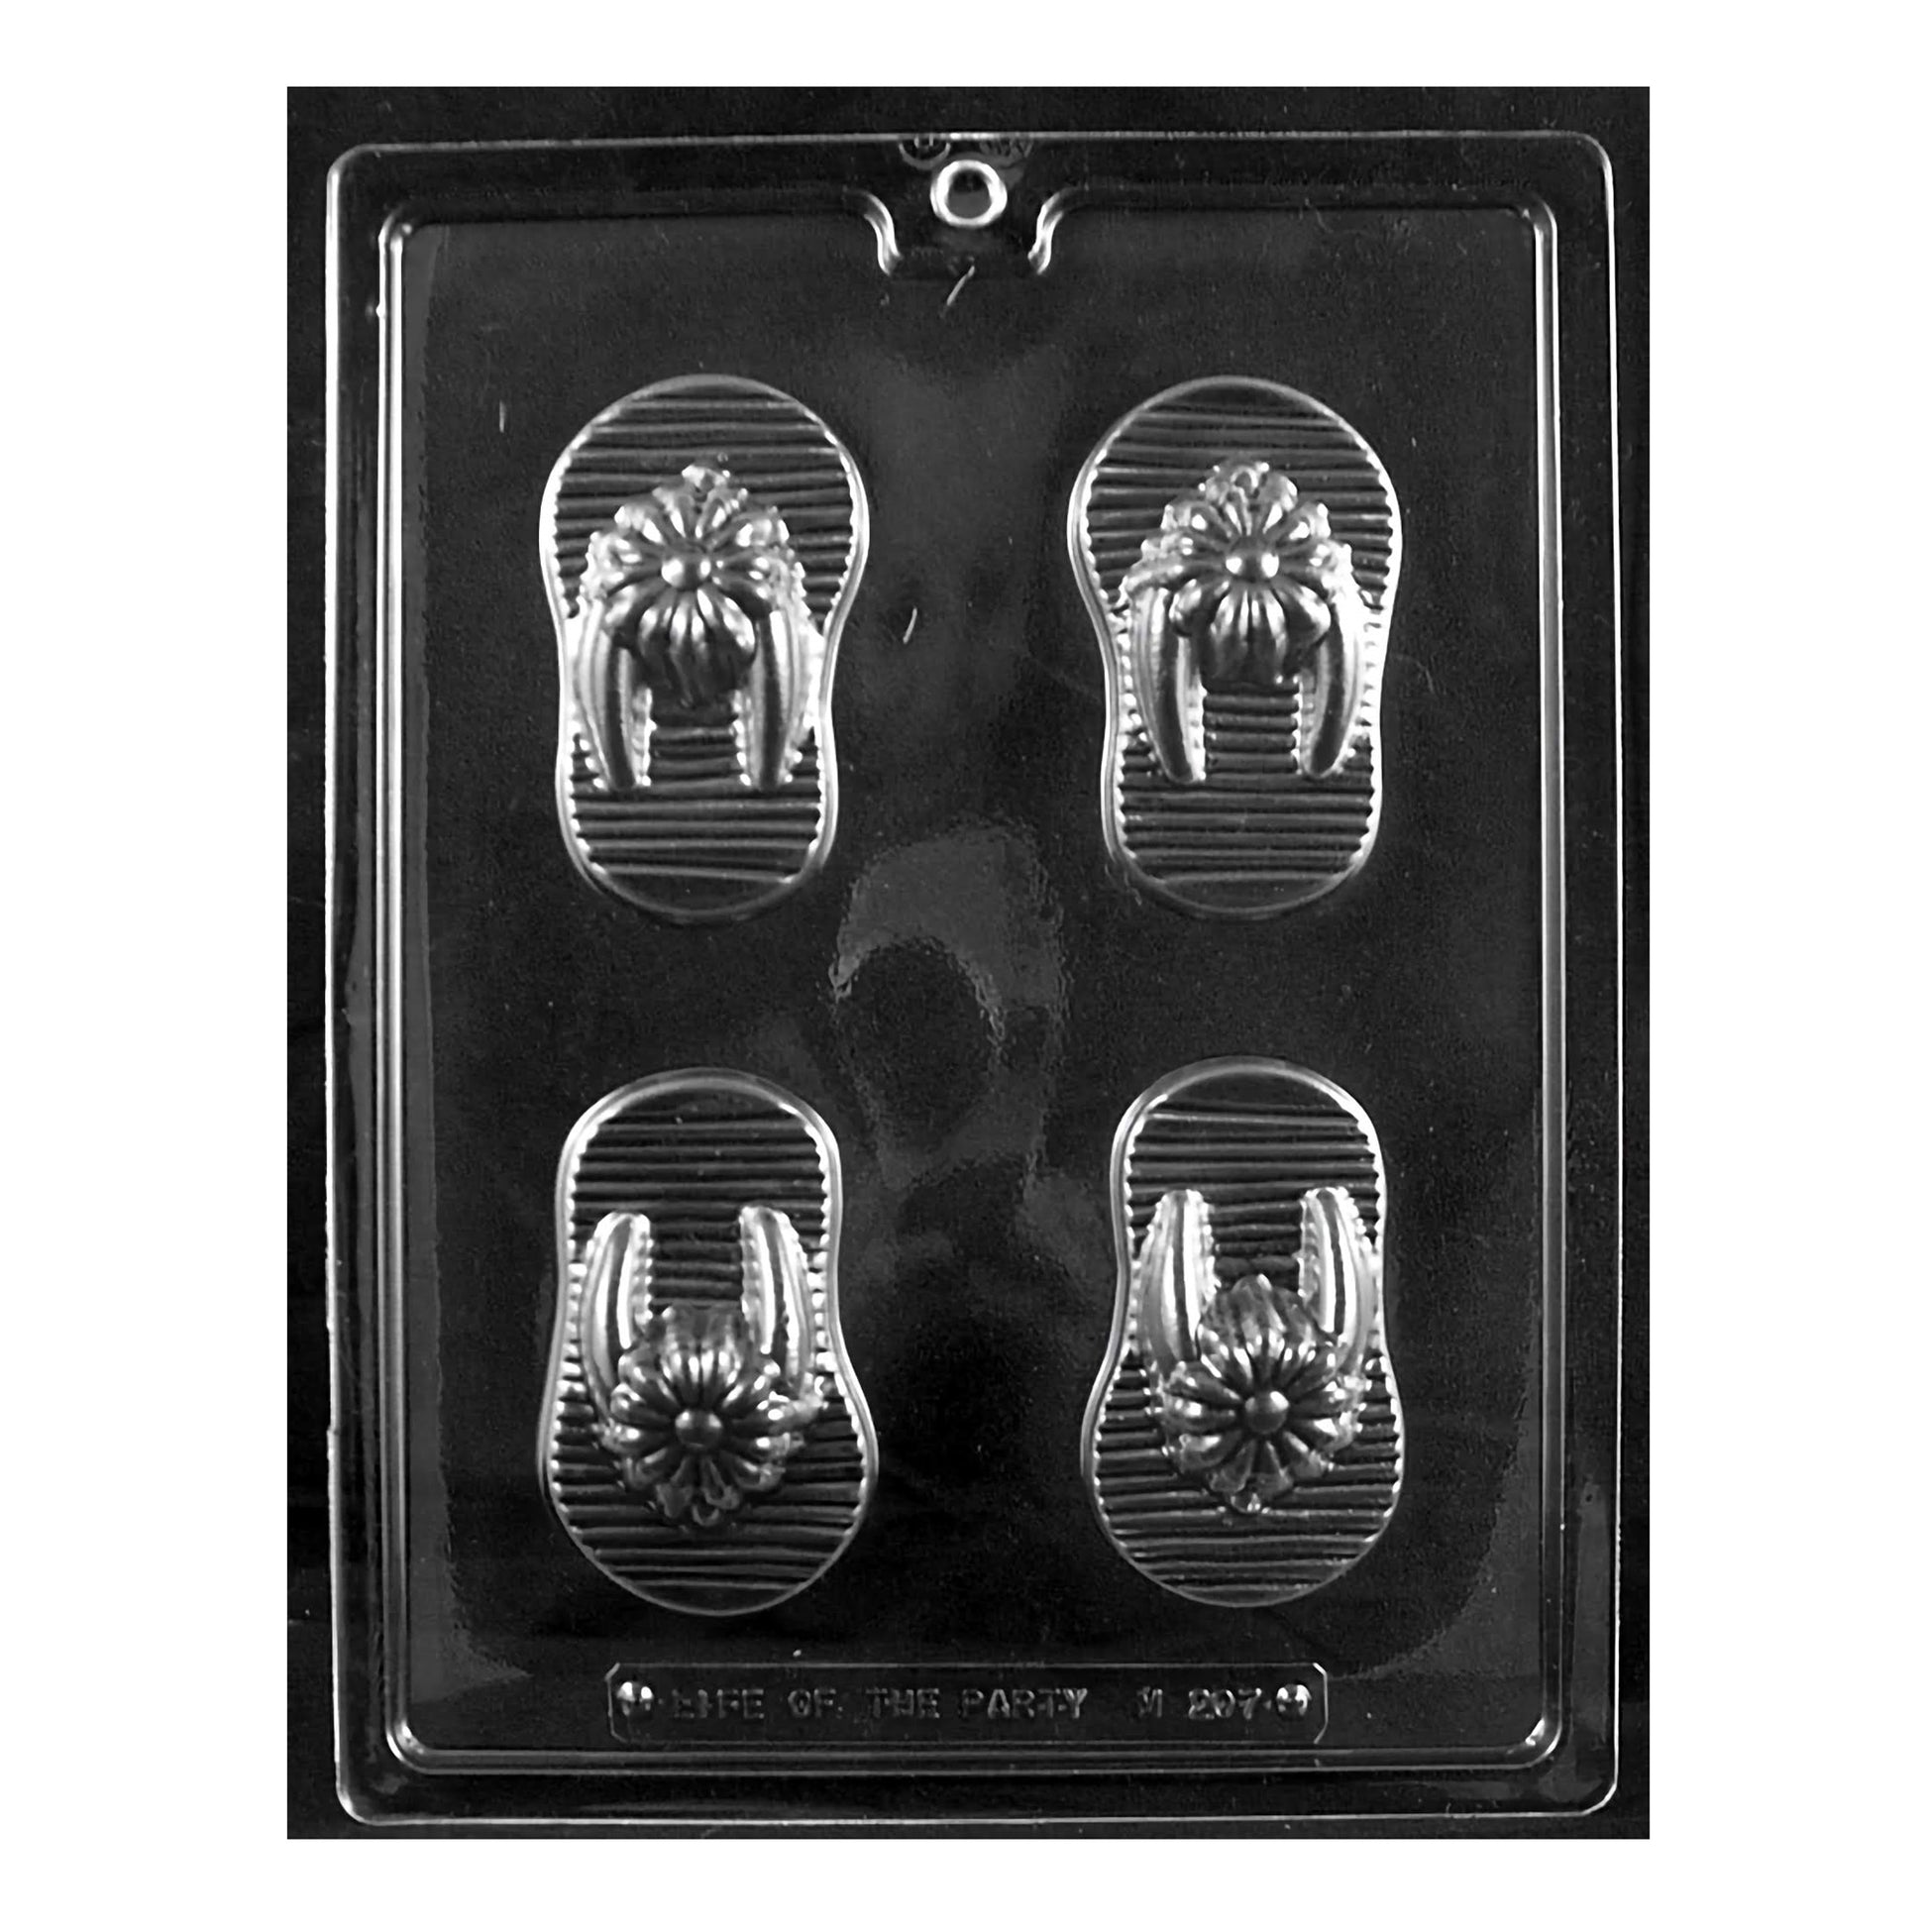 A chocolate mold featuring four large cavities shaped like flip-flops. The cavities have a detailed pattern, resembling the straps and soles of real flip-flops, perfect for creating summer-themed chocolate treats.